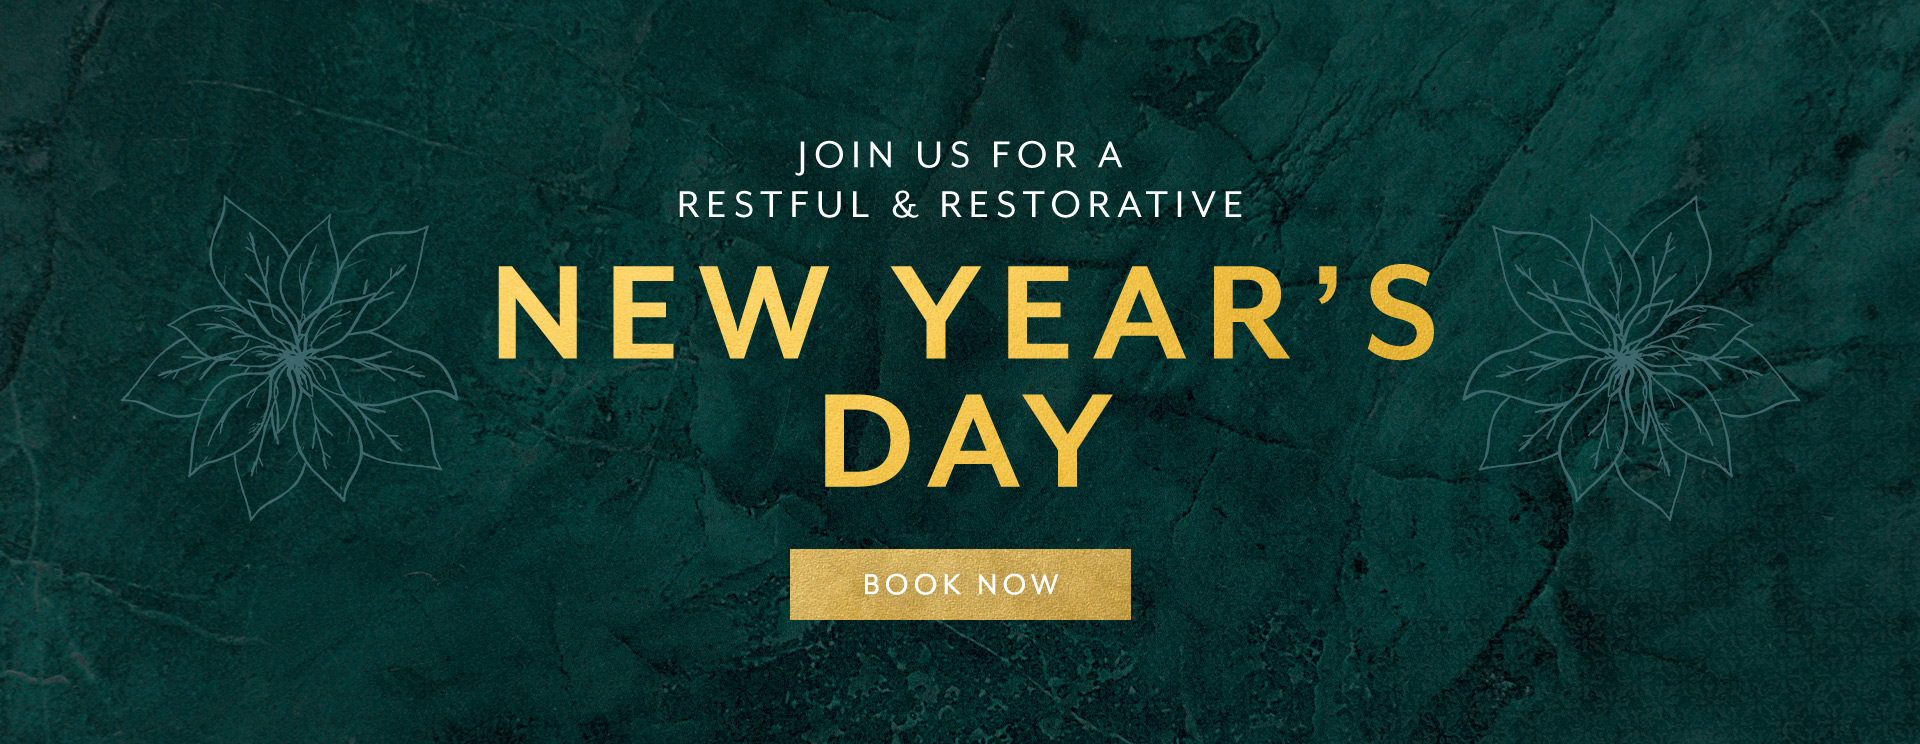 New Year's Day at The Botanist Bristol